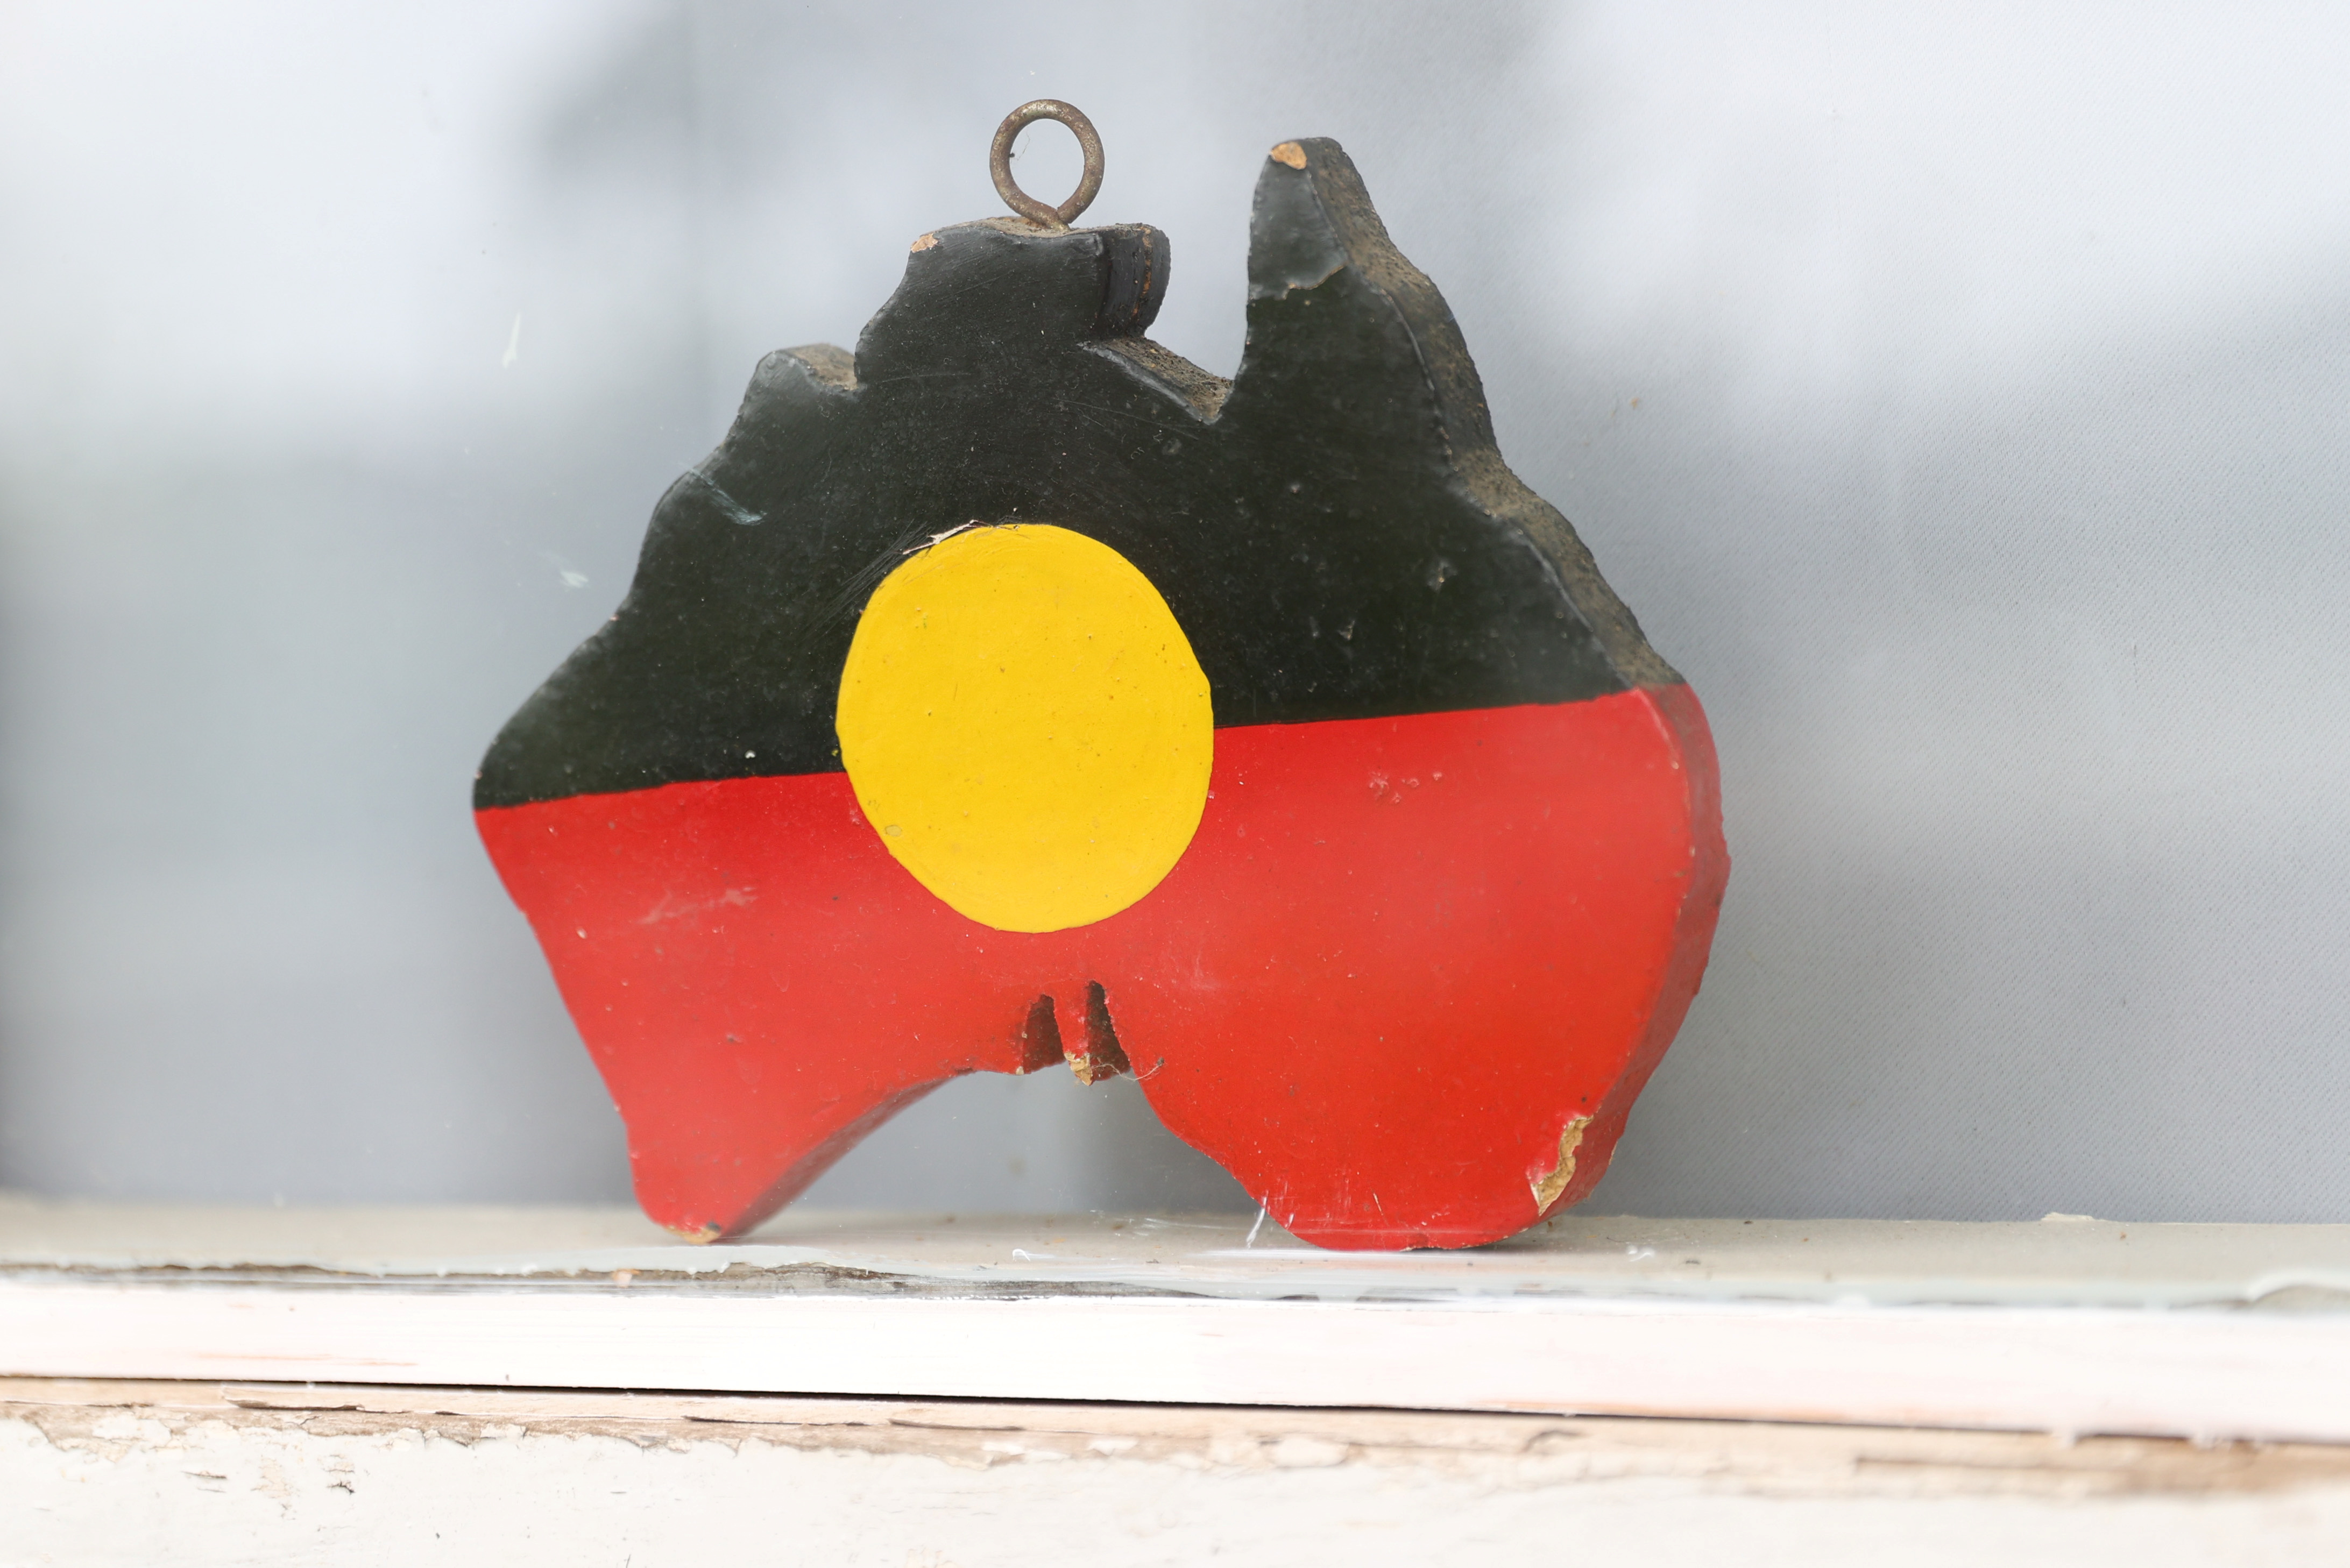 A depiction of the Australian Aboriginal Flag is seen on a window sill in Sydney